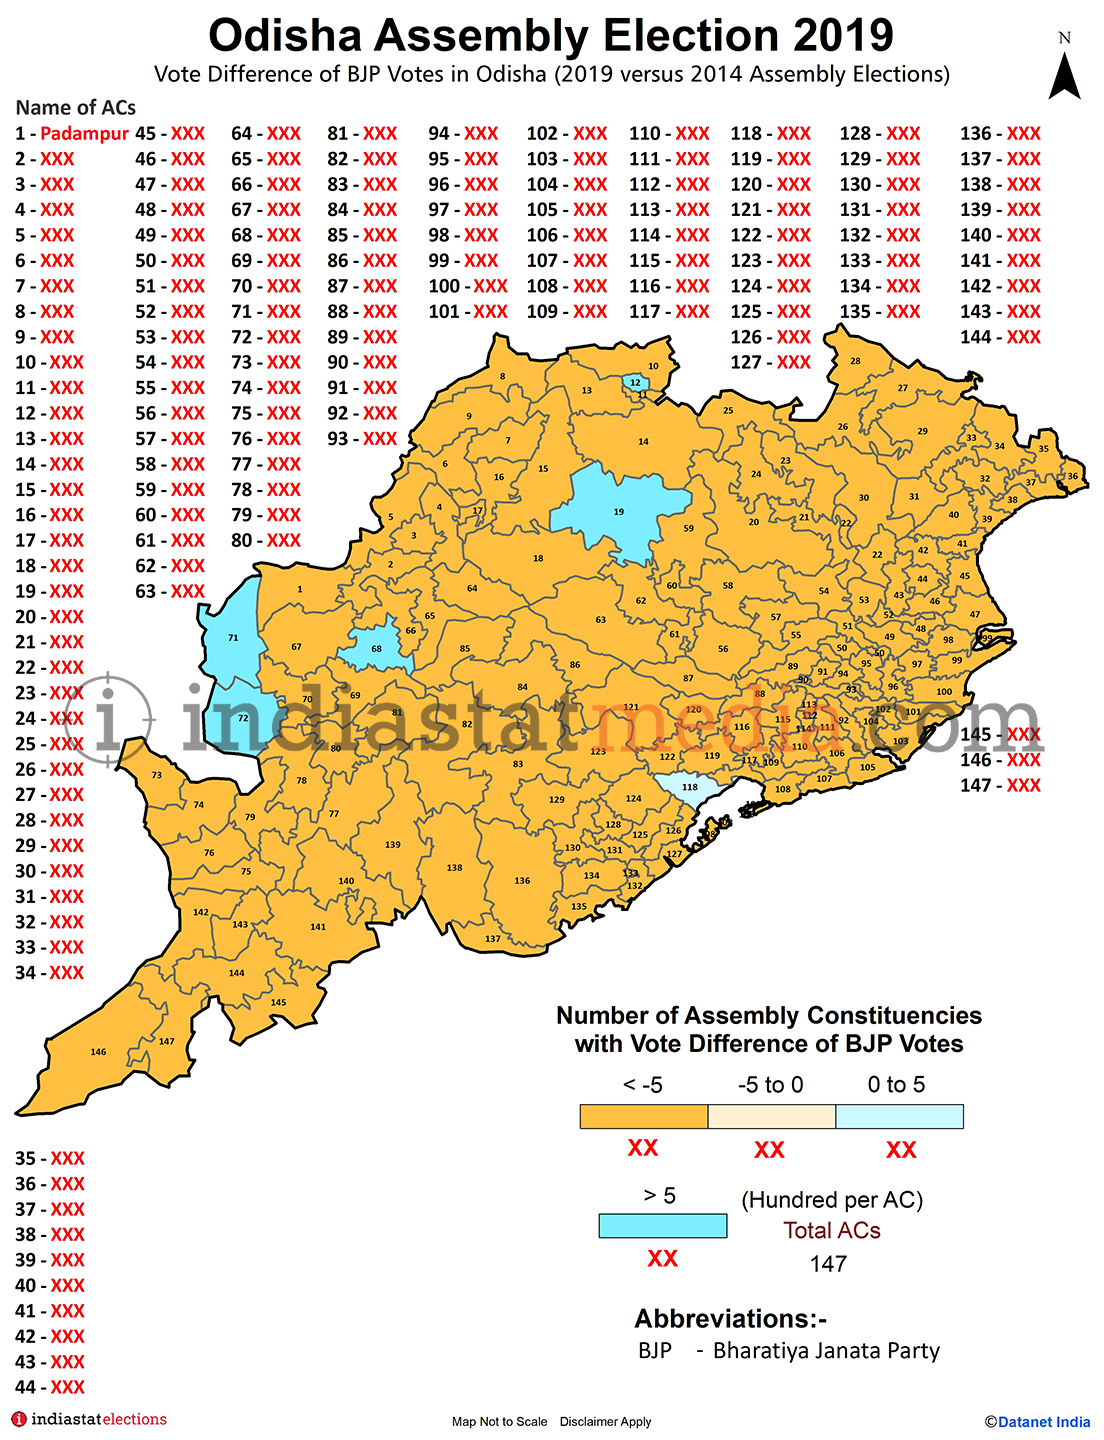 Assembly Constituencies with Vote Difference of BJP Votes in Odisha (Assembly Elections - 2014 & 2019)